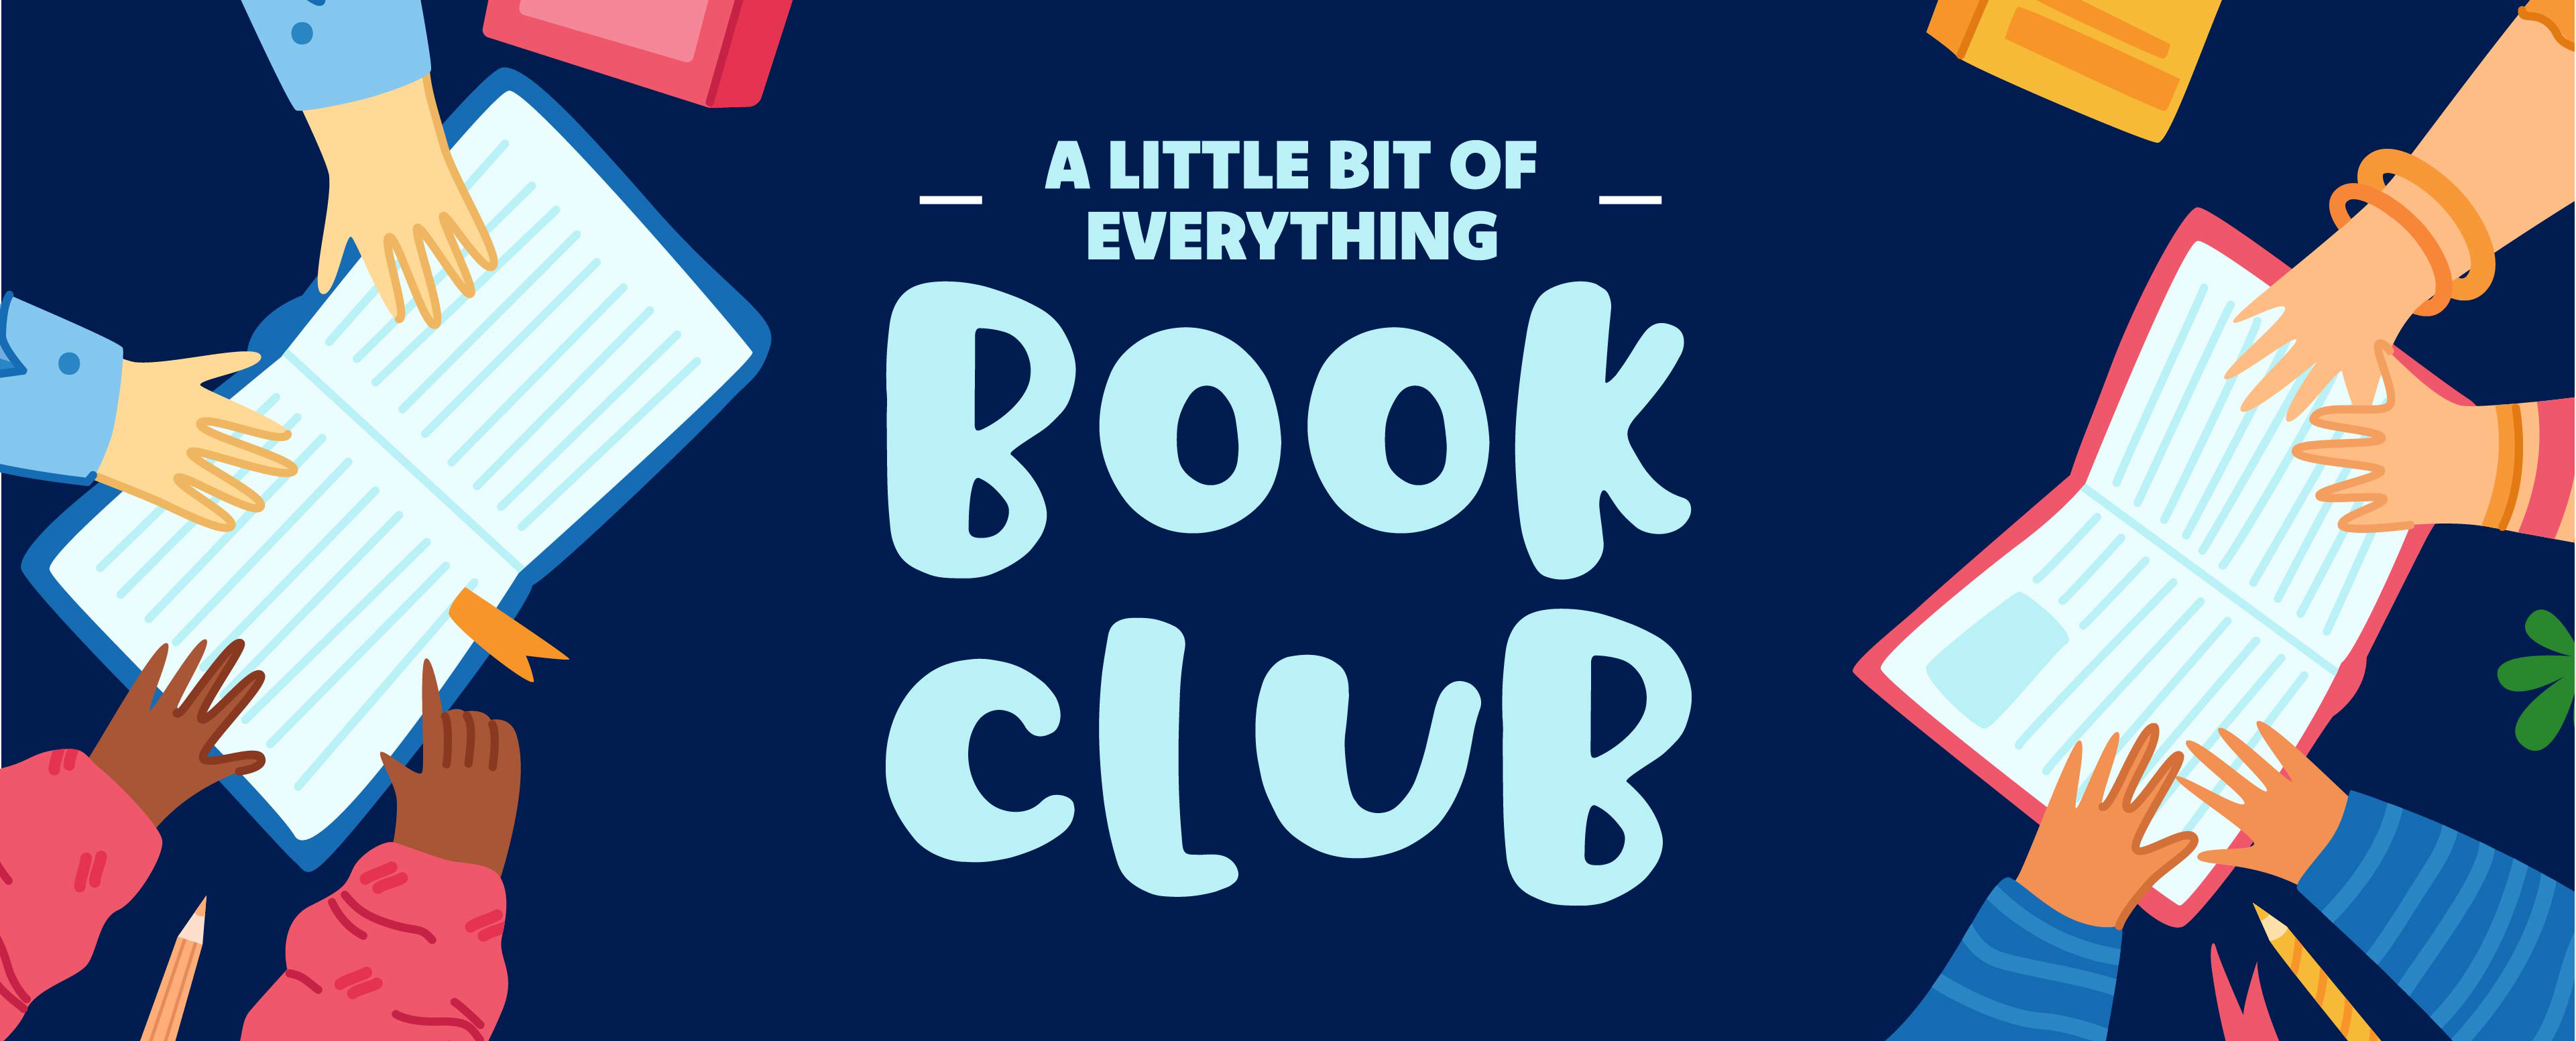 A Little Bit of Everything Book Club